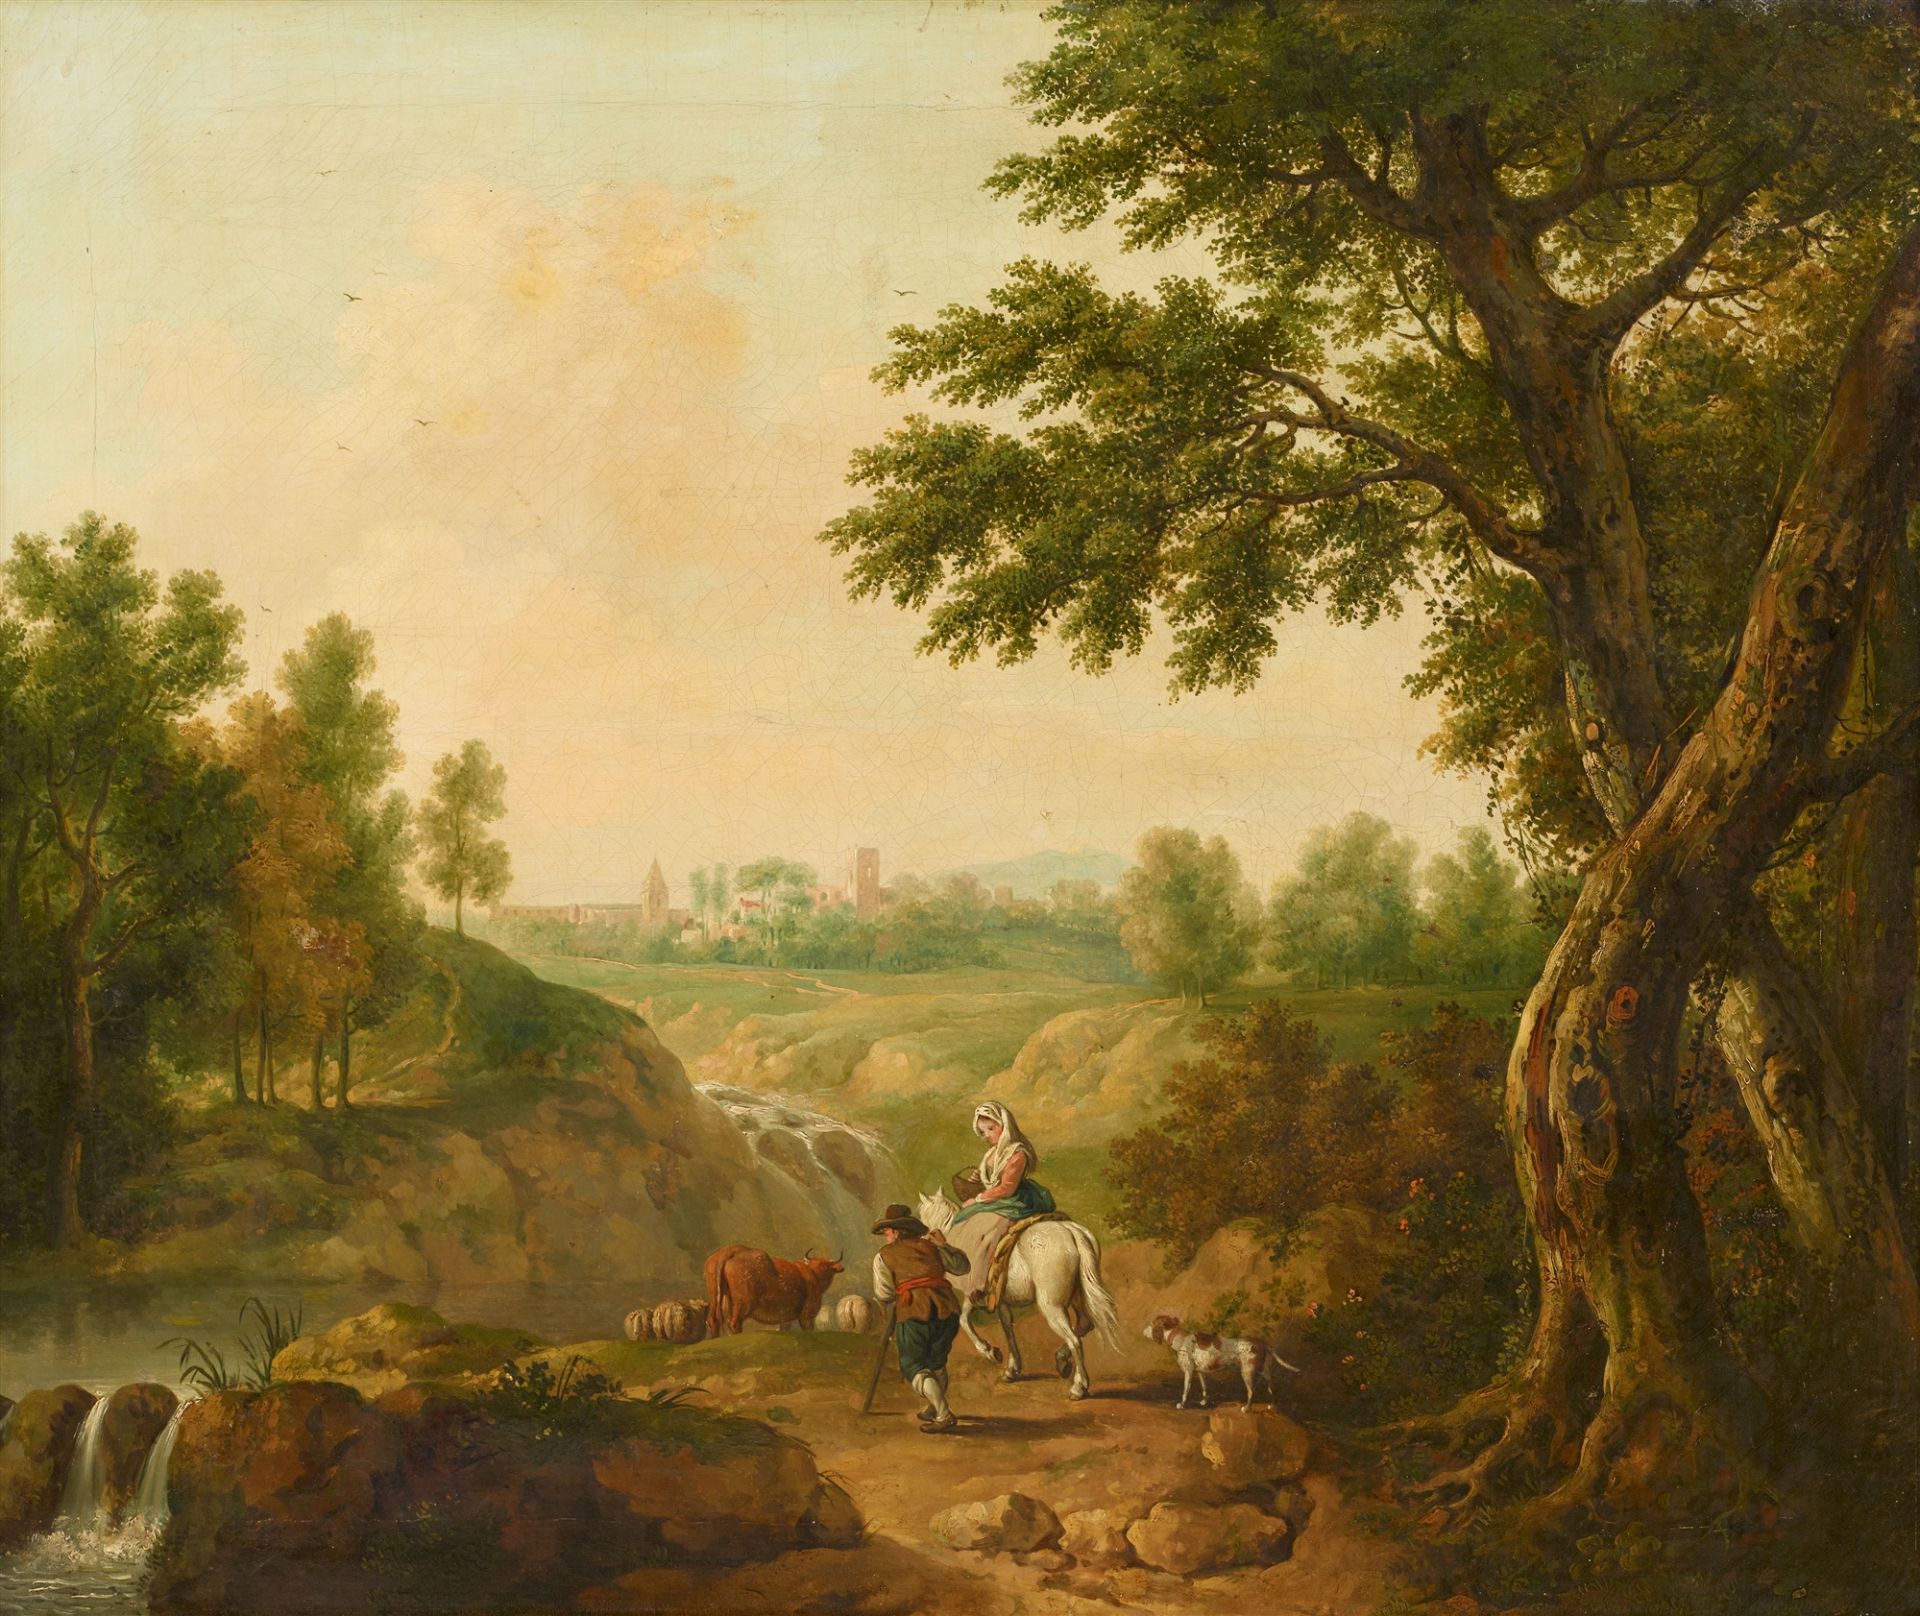 Francesco Zuccarelli, Landscape with Shepherd and Peasant